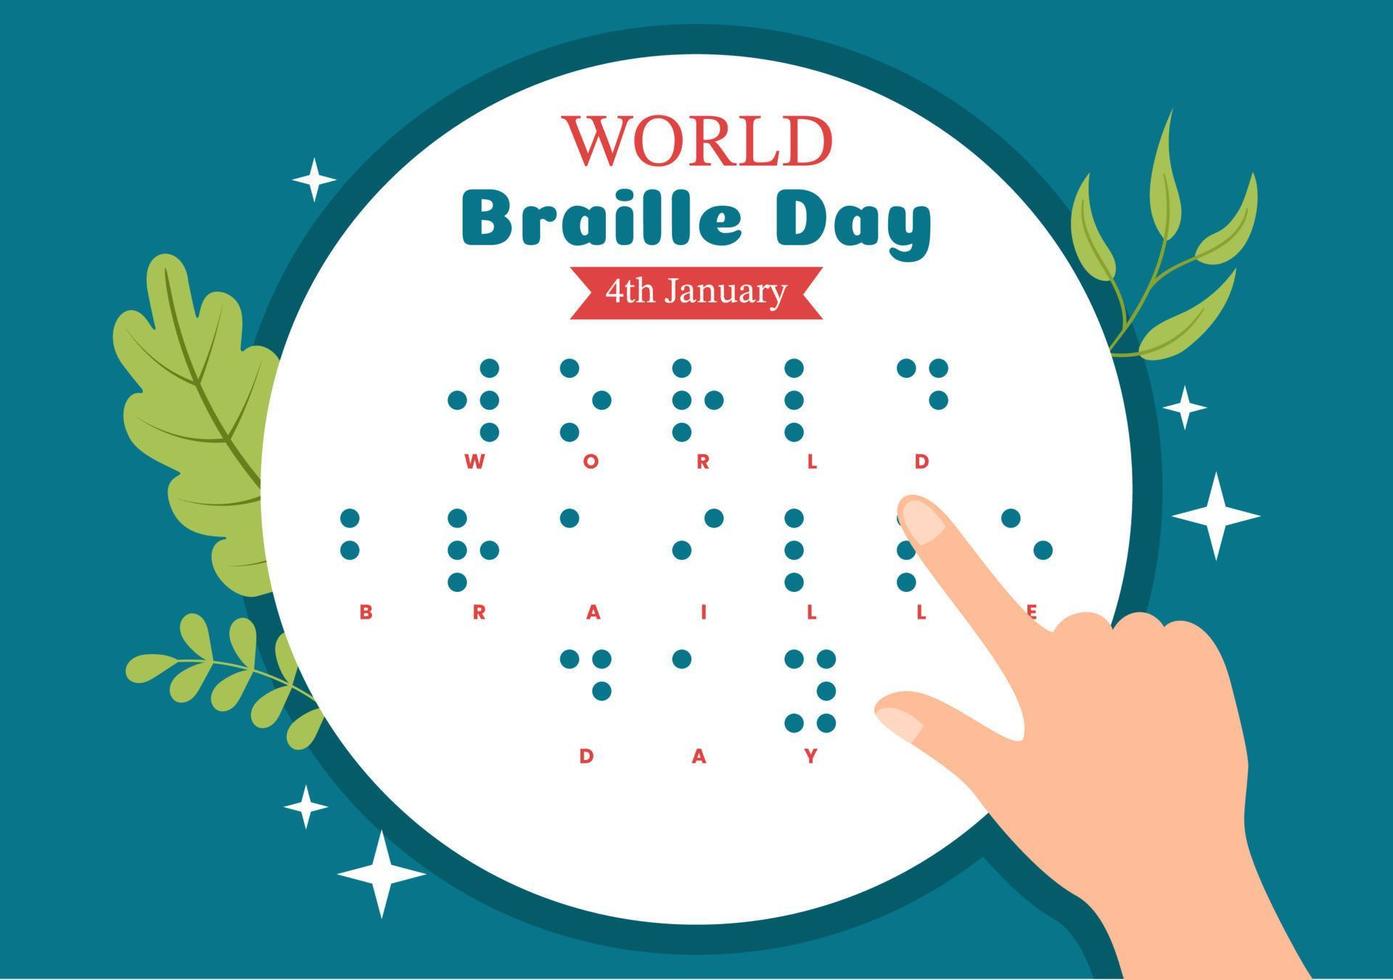 World Braille Day on 4th of January with Text by Alphabet for Means of Communication in Flat Cartoon Hand Drawn Templates Illustration vector